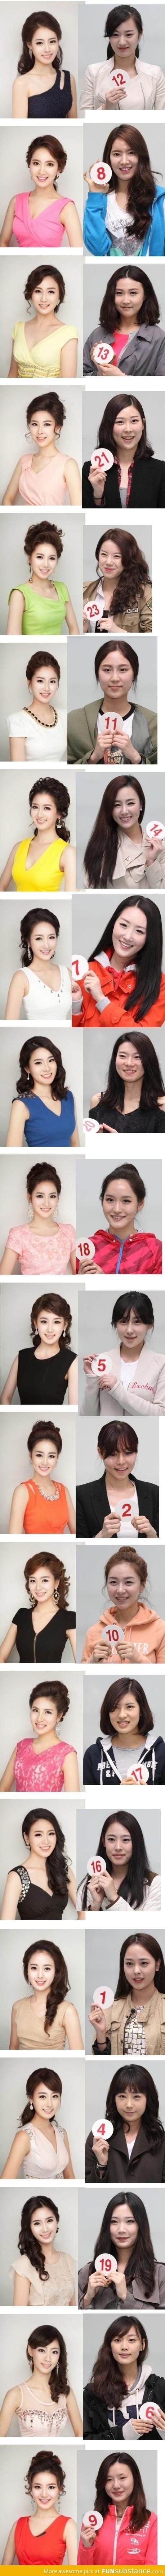 Before and after pictures of the 2013 Miss Korea pageant